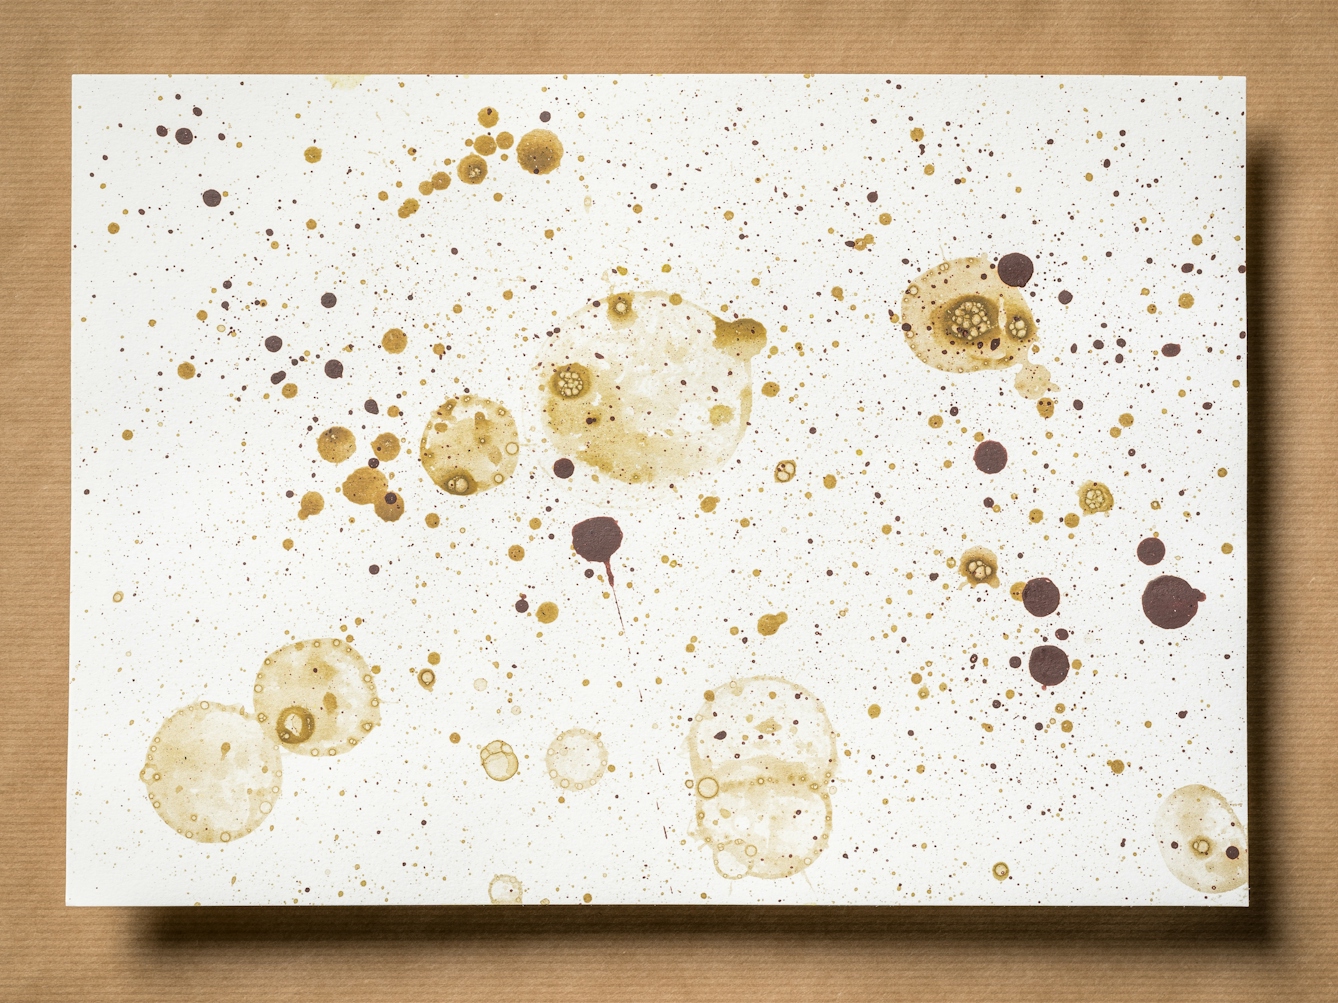 Photograph of an original artwork on watercolour paper. The artwork is resting on a brown parcel paper background. The artwork shows many varying in size droplet spatters and rings, made with coloured ink. The ink colours are dark and light greens. The spatters seem random in distribution.